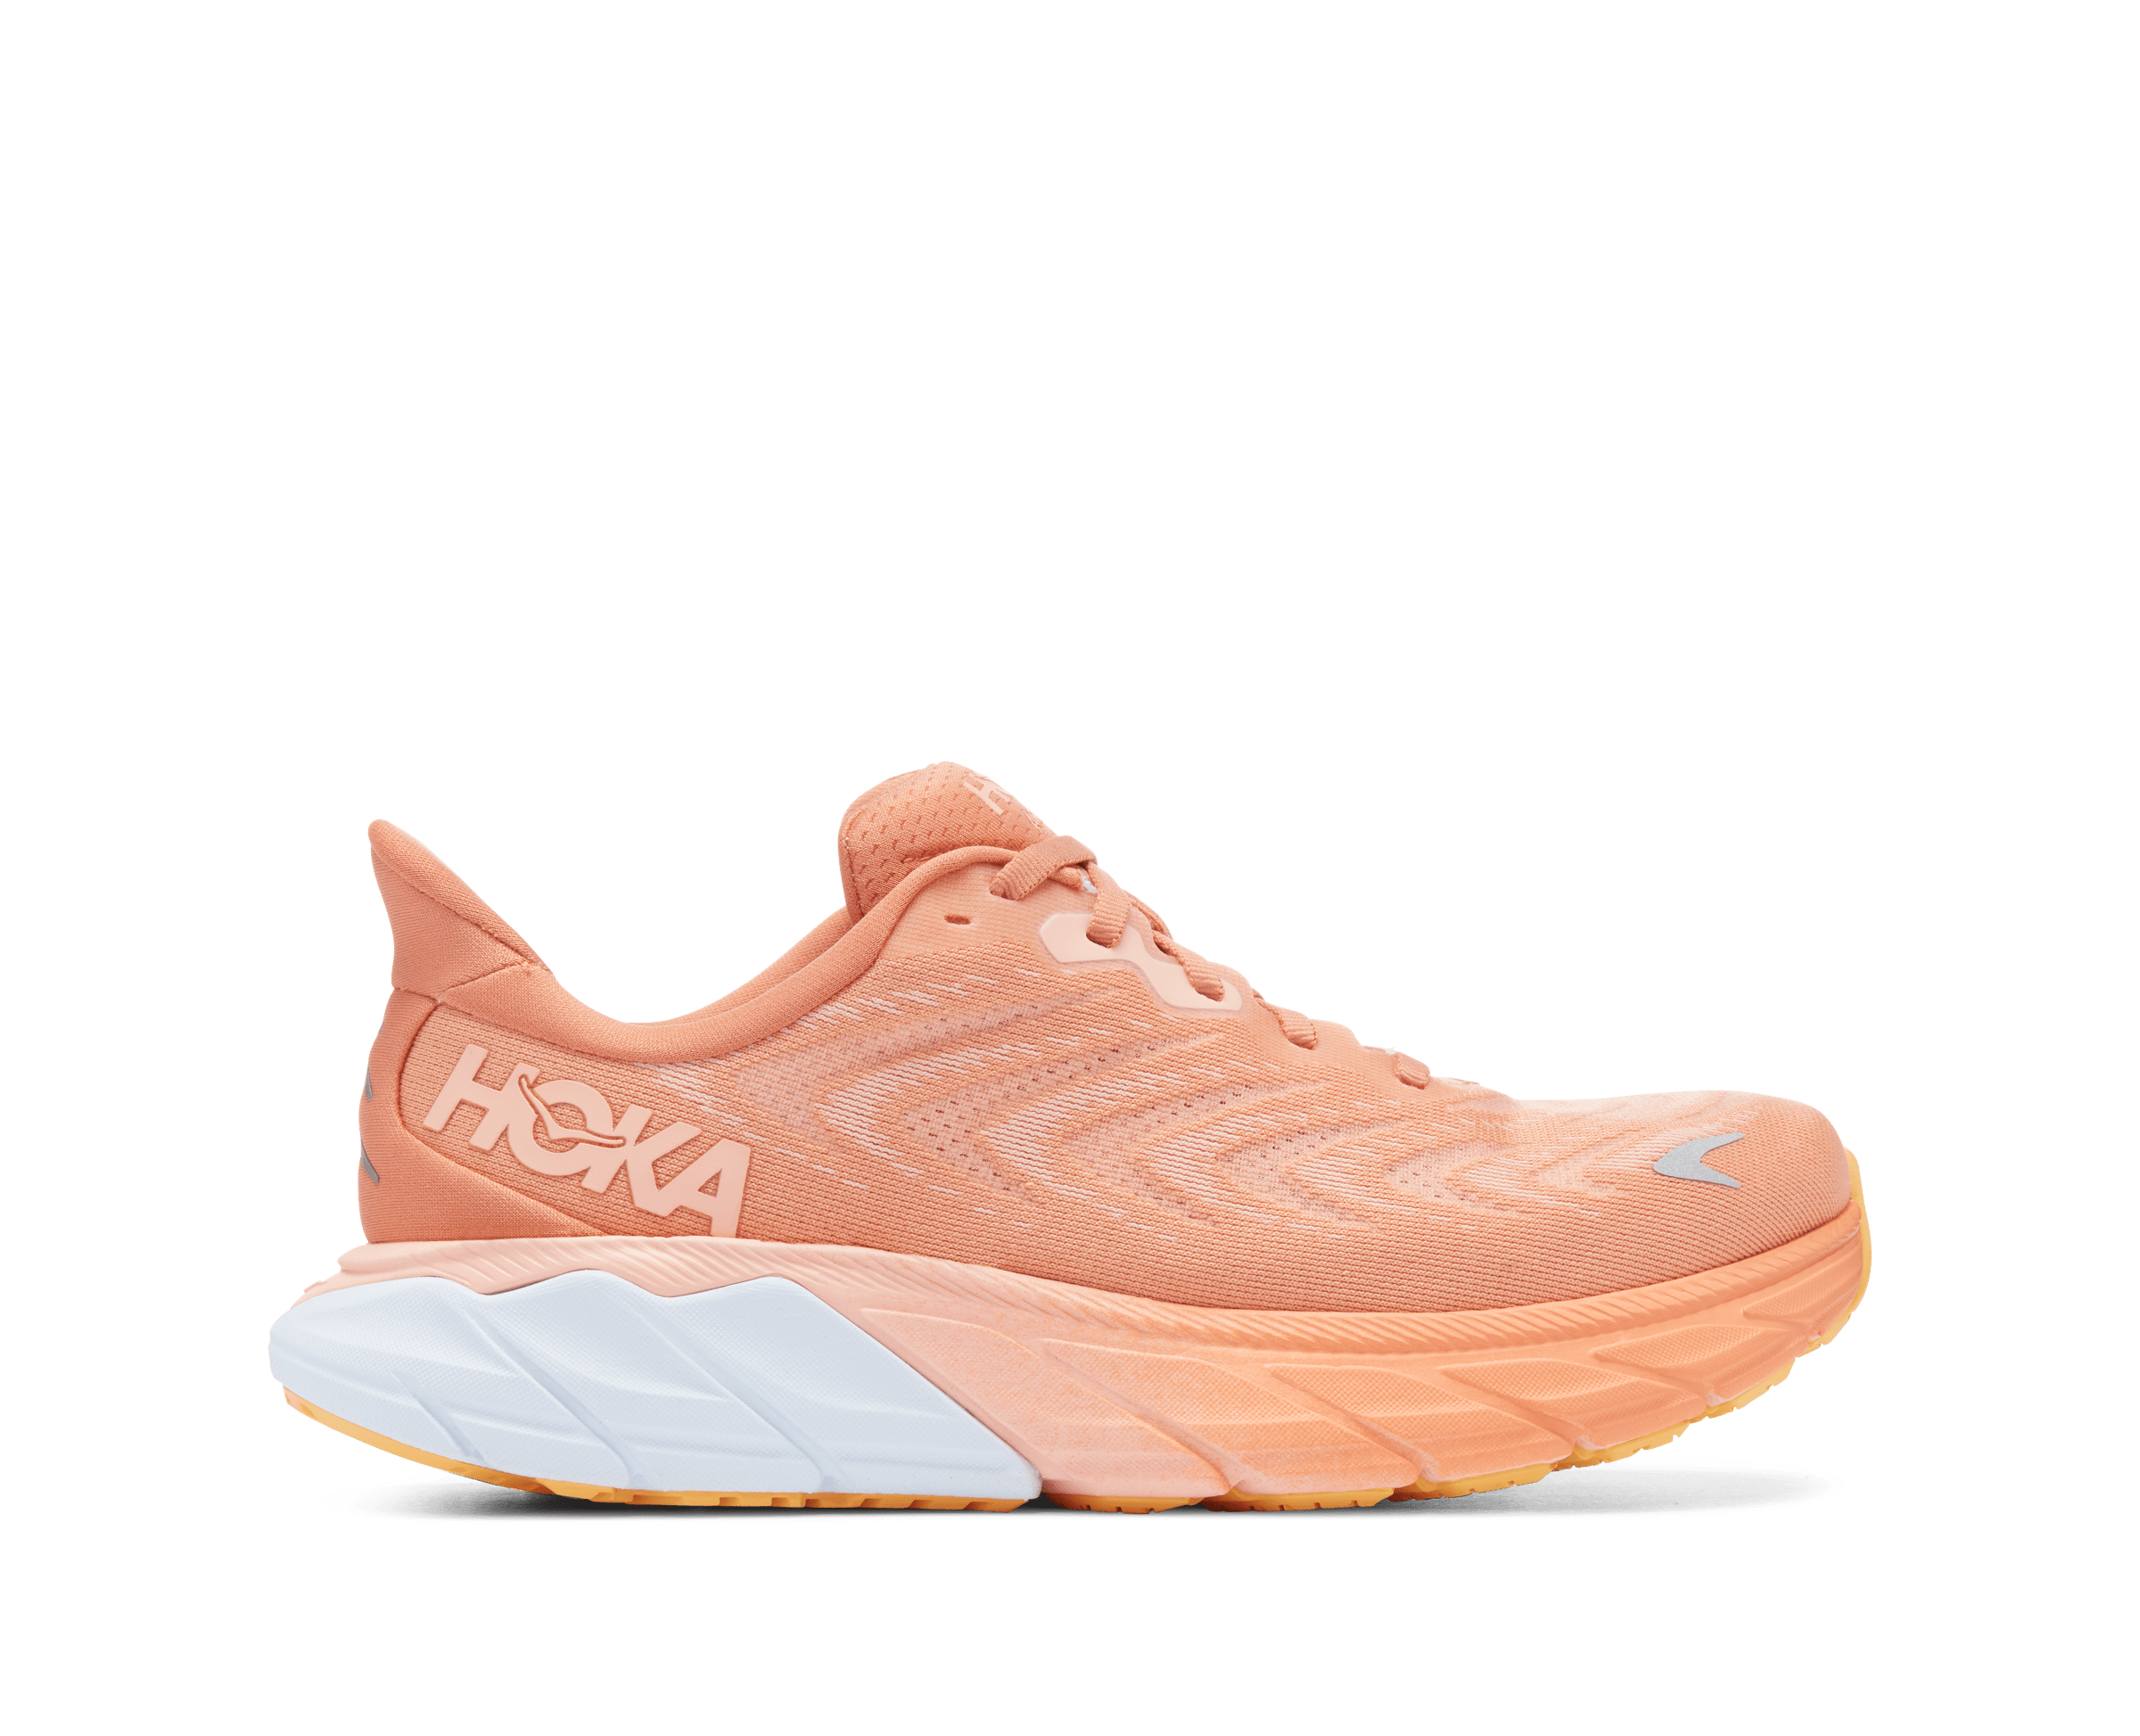 Lateral view of the Women's Arahi 6 in the color SUN BAKED / SHELL CORAL